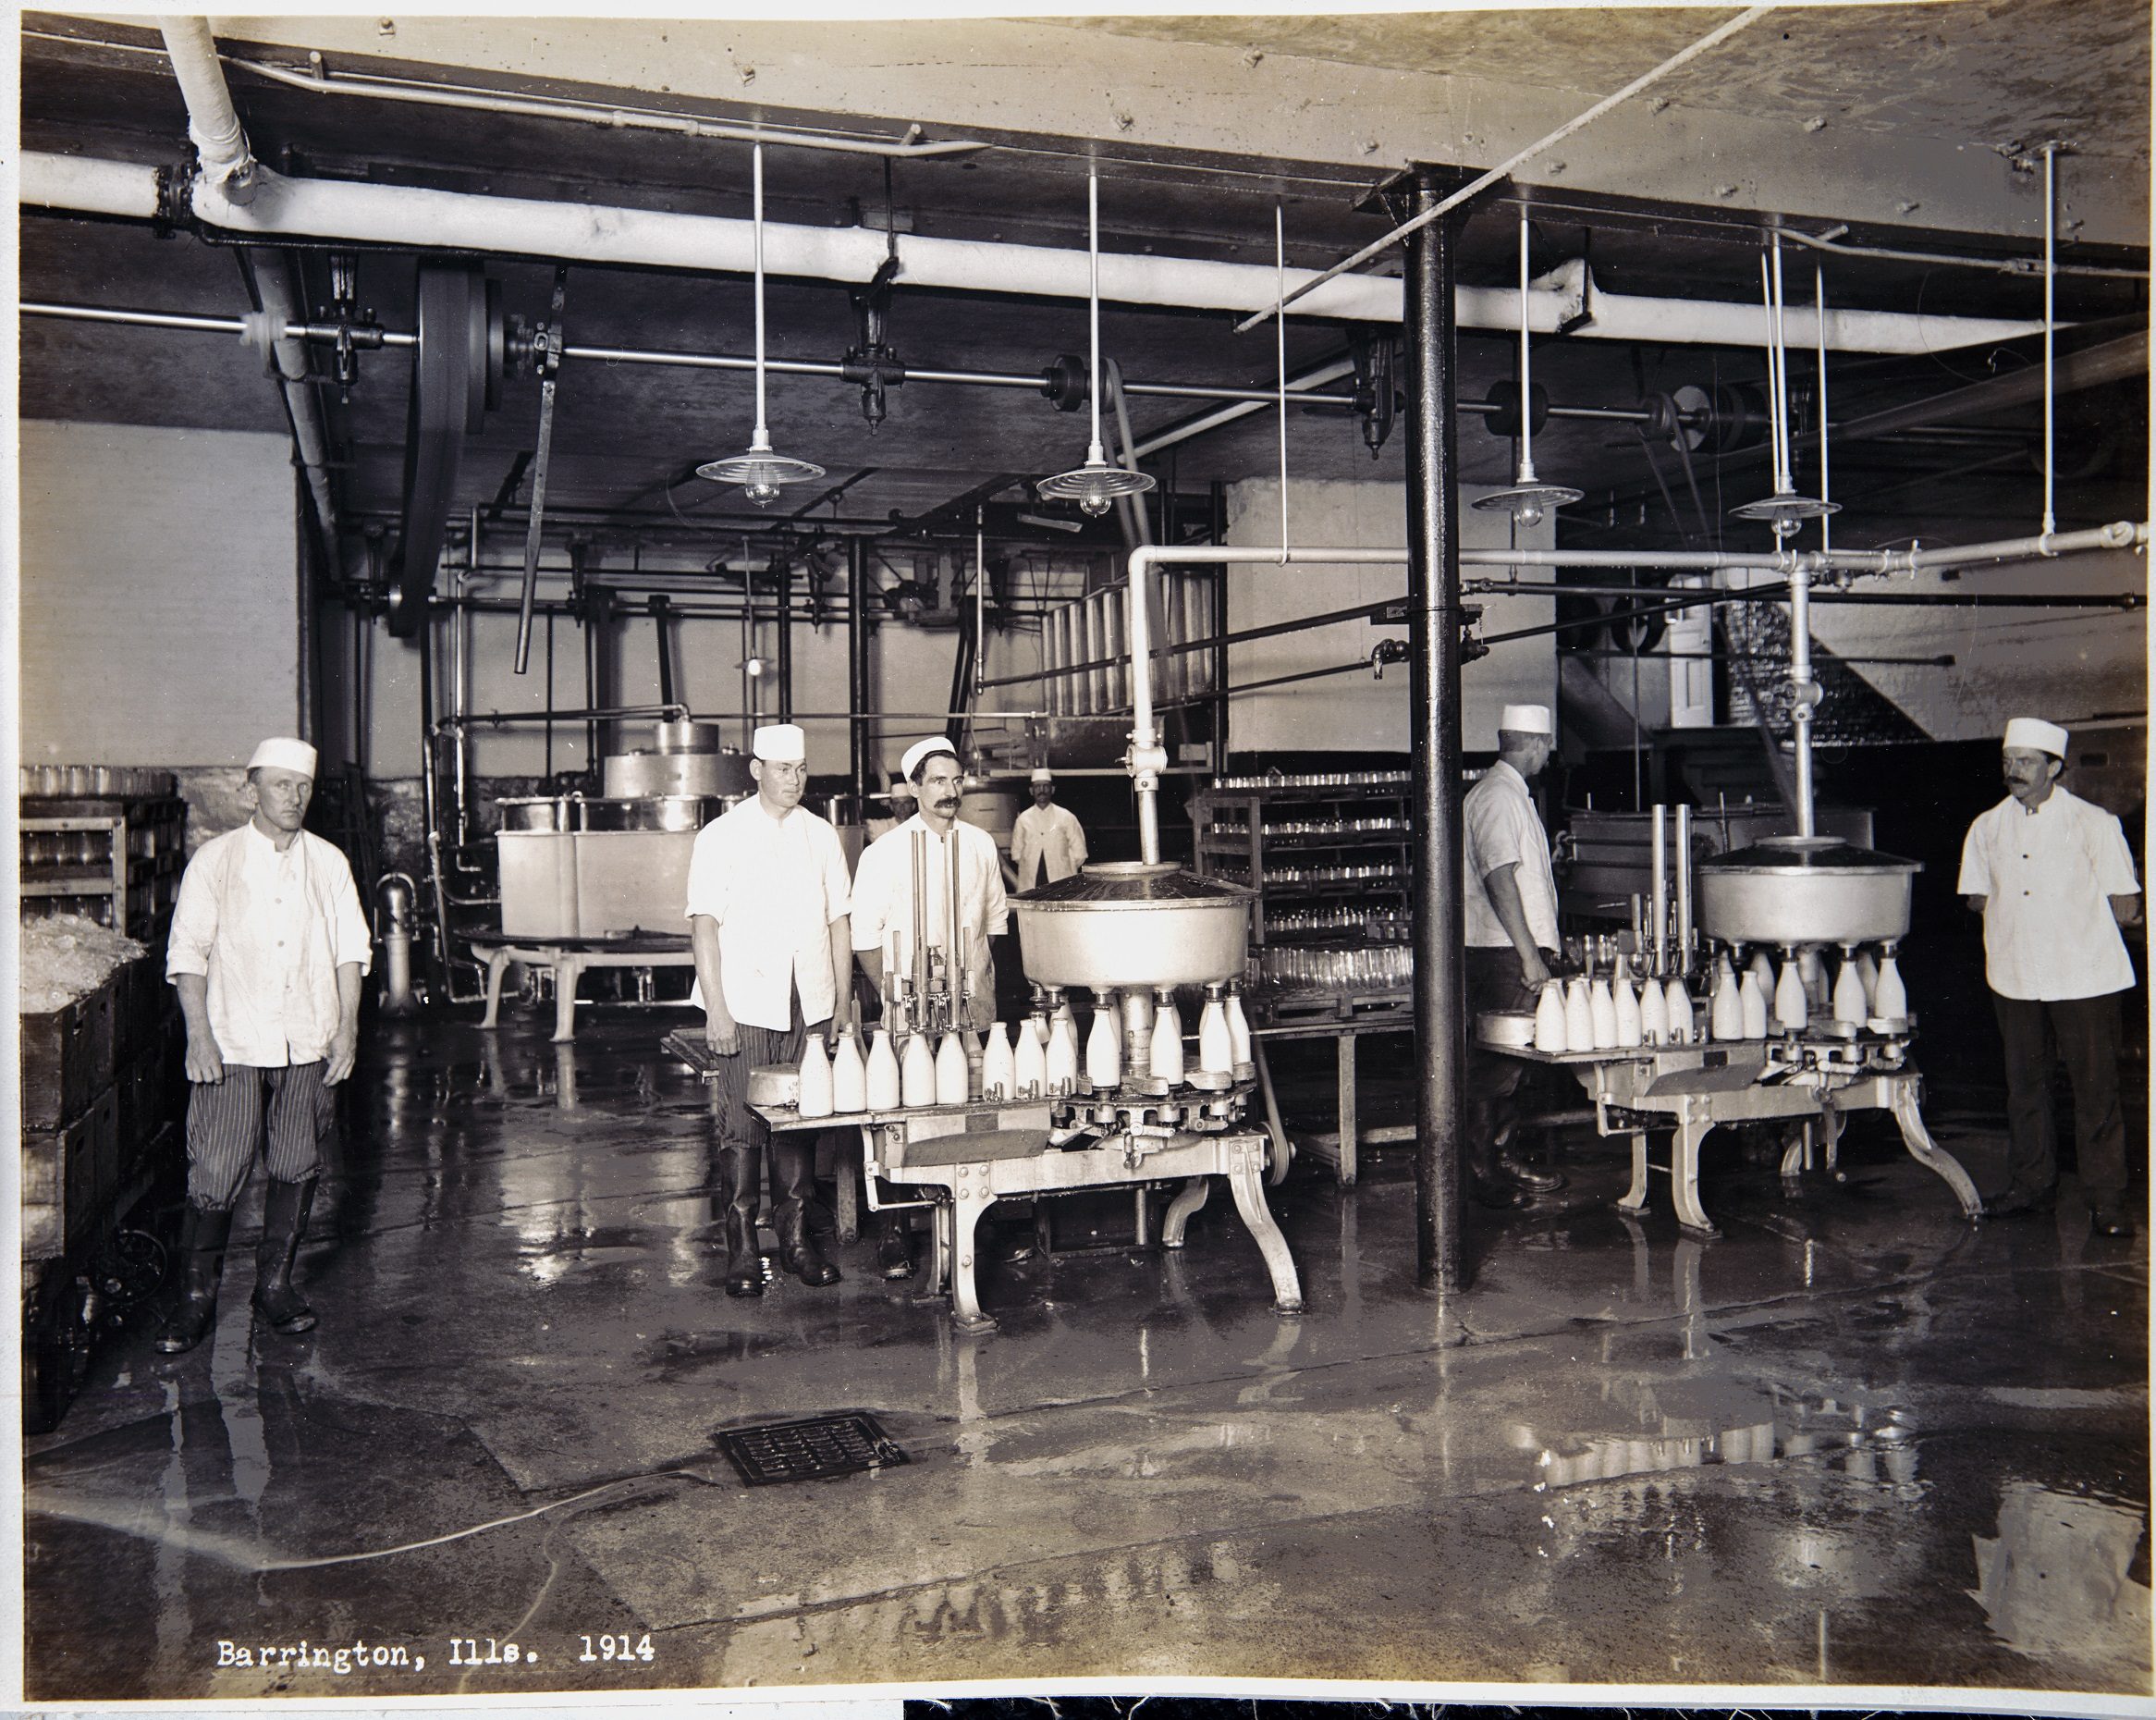 Workers bottling milk at the Bowman Dairy Company, Barrington, Illinois, 1914.